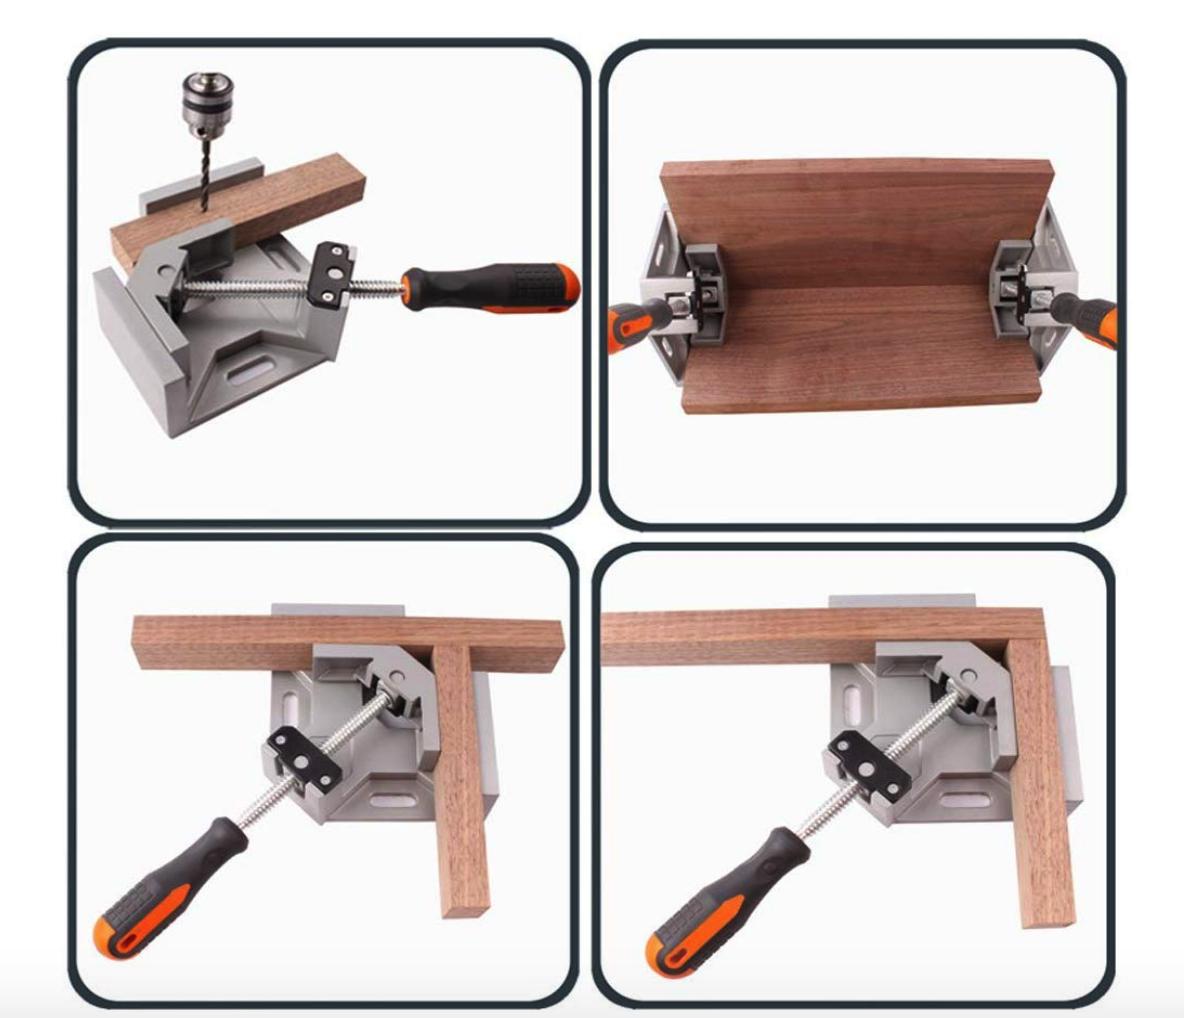 Welding 90 Degree Right Angle Clamp Adjustable Swing Jaw Vise for Woodworking Drilling Corner Clamp with Aluminum Alloy Body Doweling